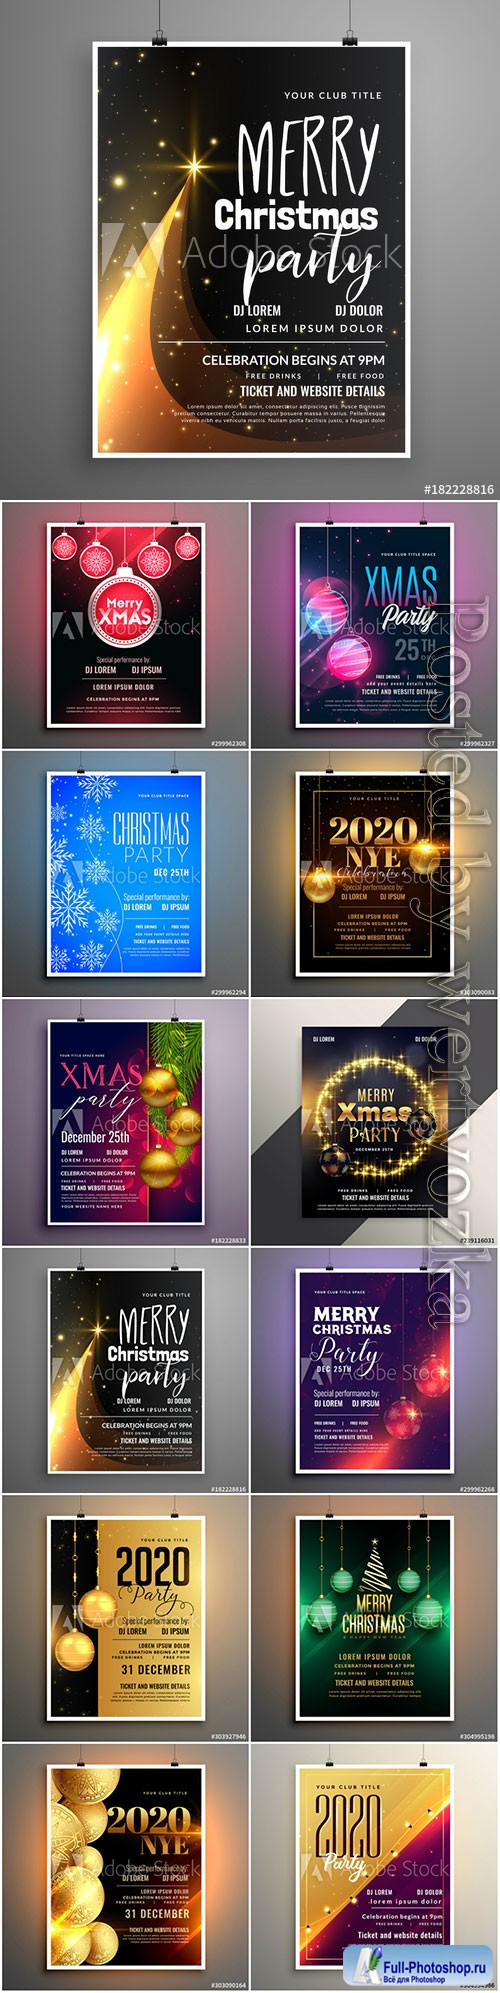 Stylish 2020 new year cover flyer template design